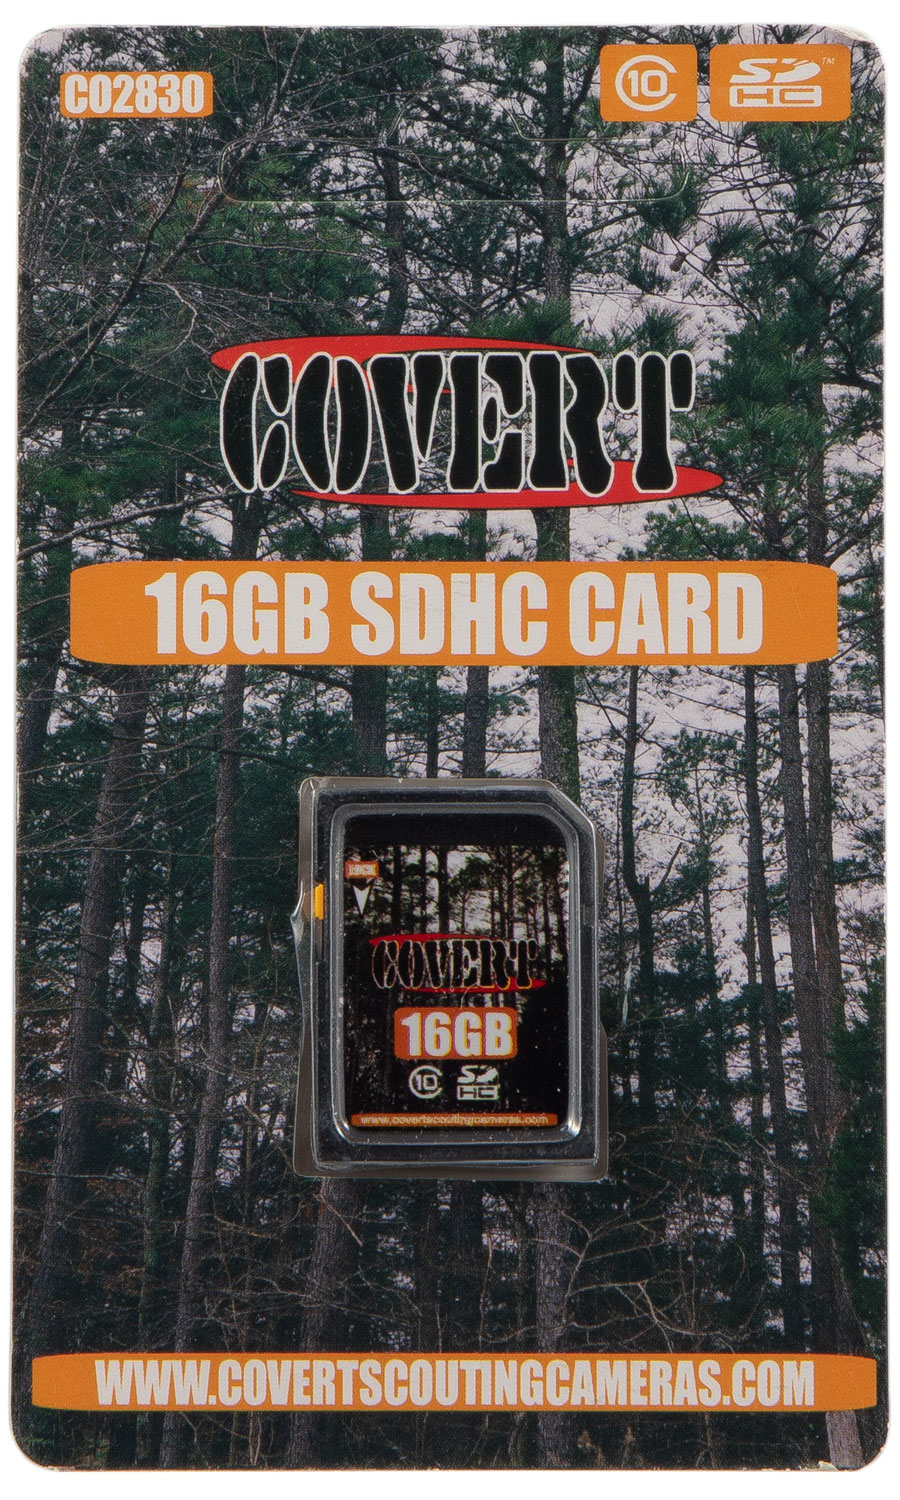 Covert Scouting Cameras 2830 SD Memory Card  16Gb